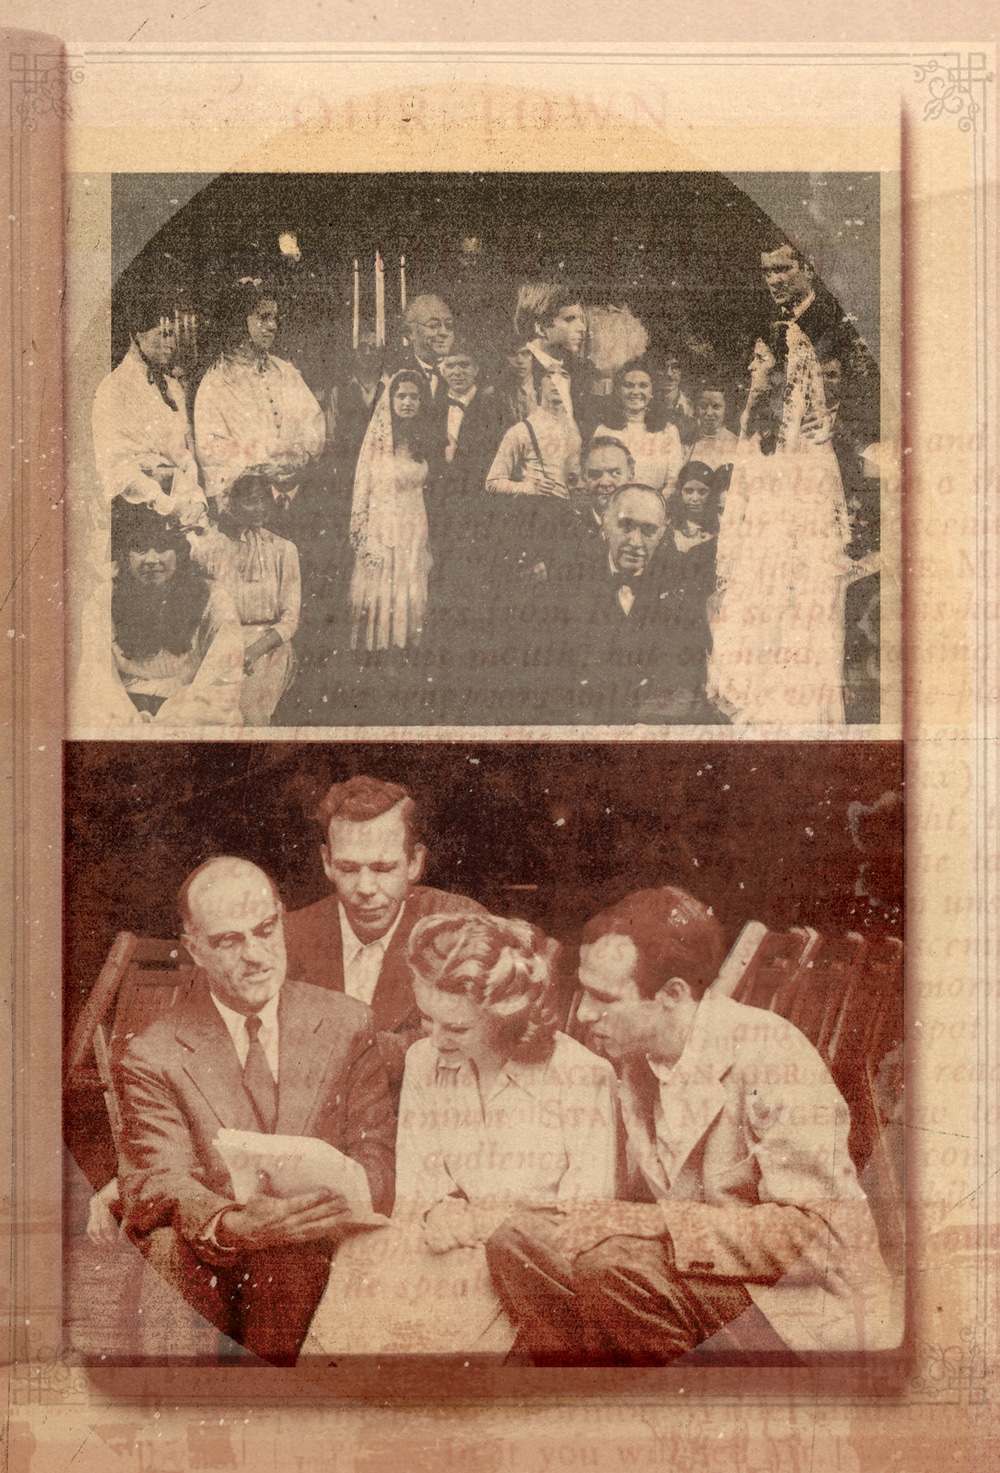 A double-exposure image from the 1976 production of Our Town in which Annie Graves (in wedding veil) portrayed Emily; Thornton Wilder (far left) at the Peterborough Players c. 1940.